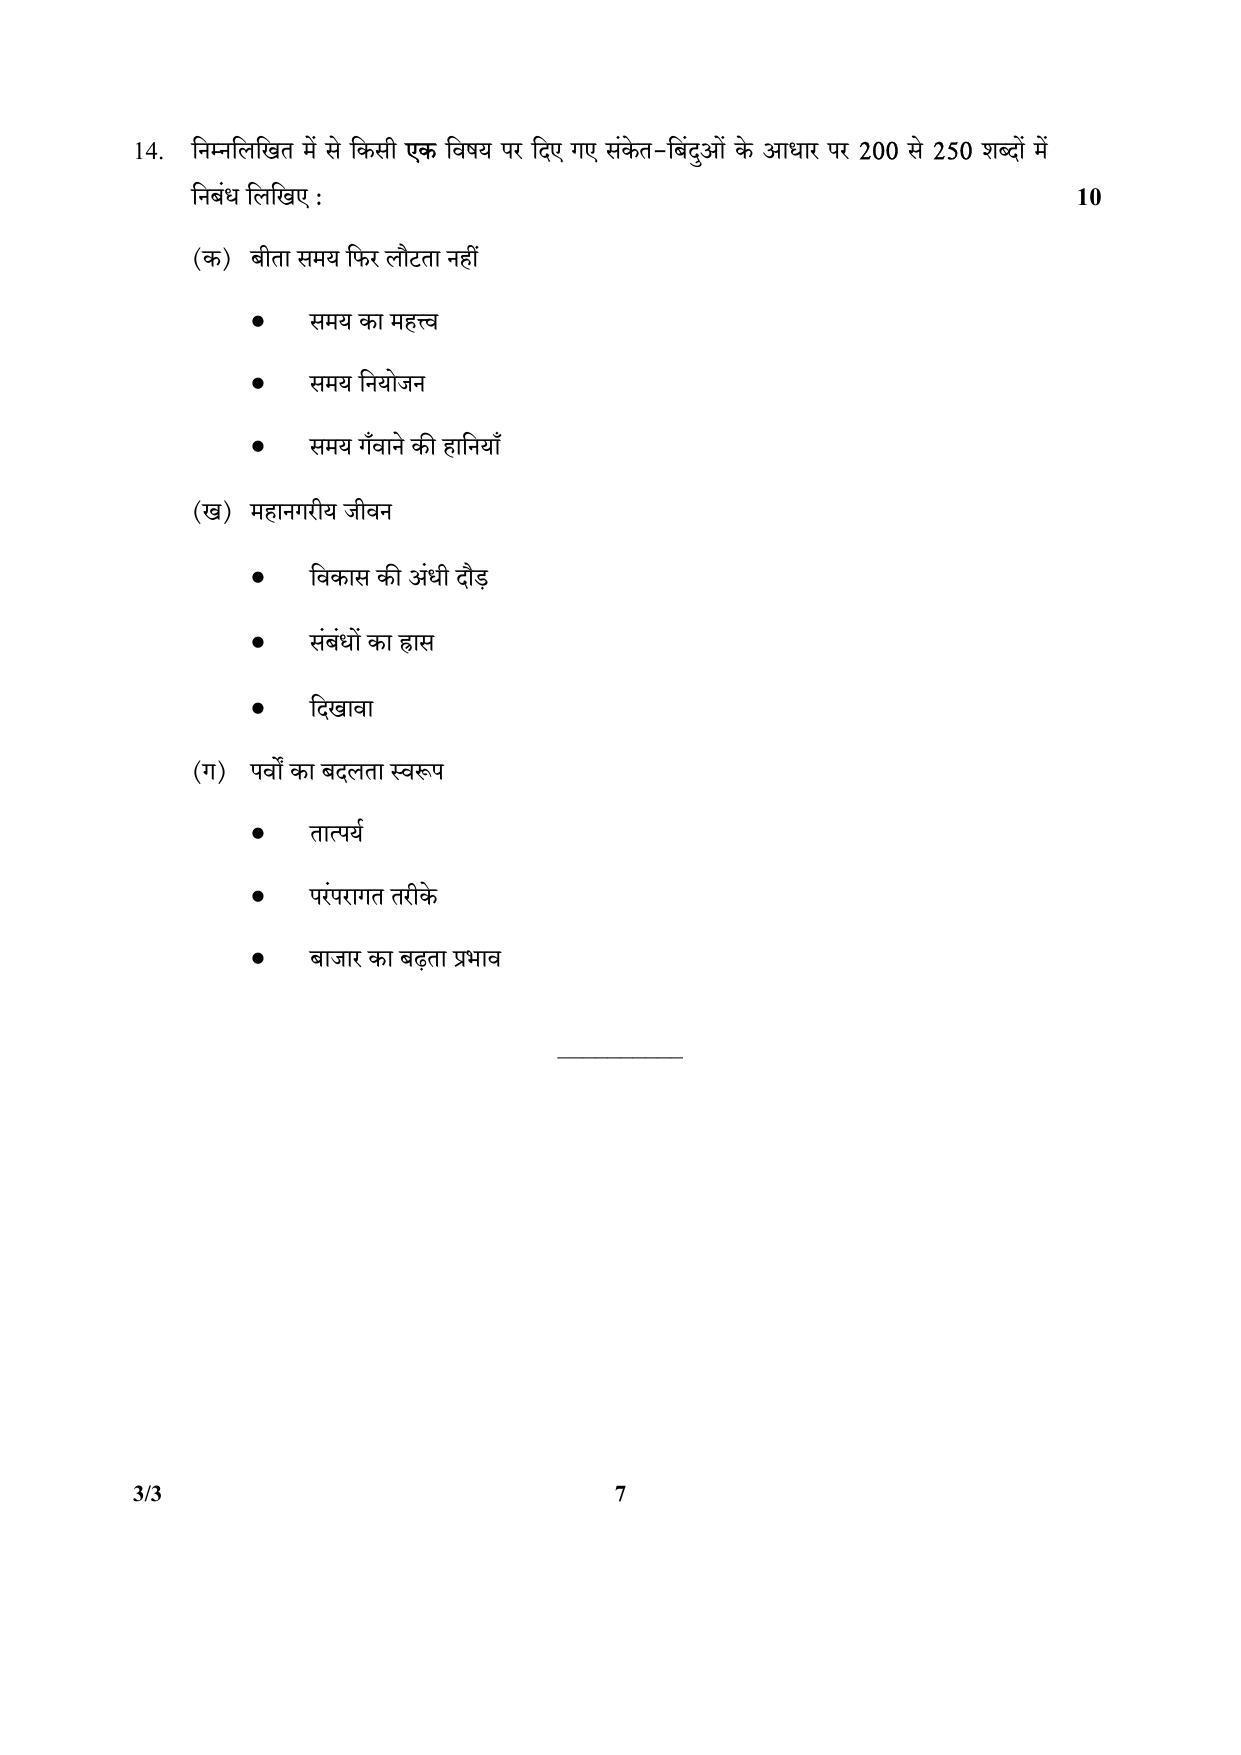 CBSE Class 10 3-3_Hindi SET-3 2018 Question Paper - Page 7